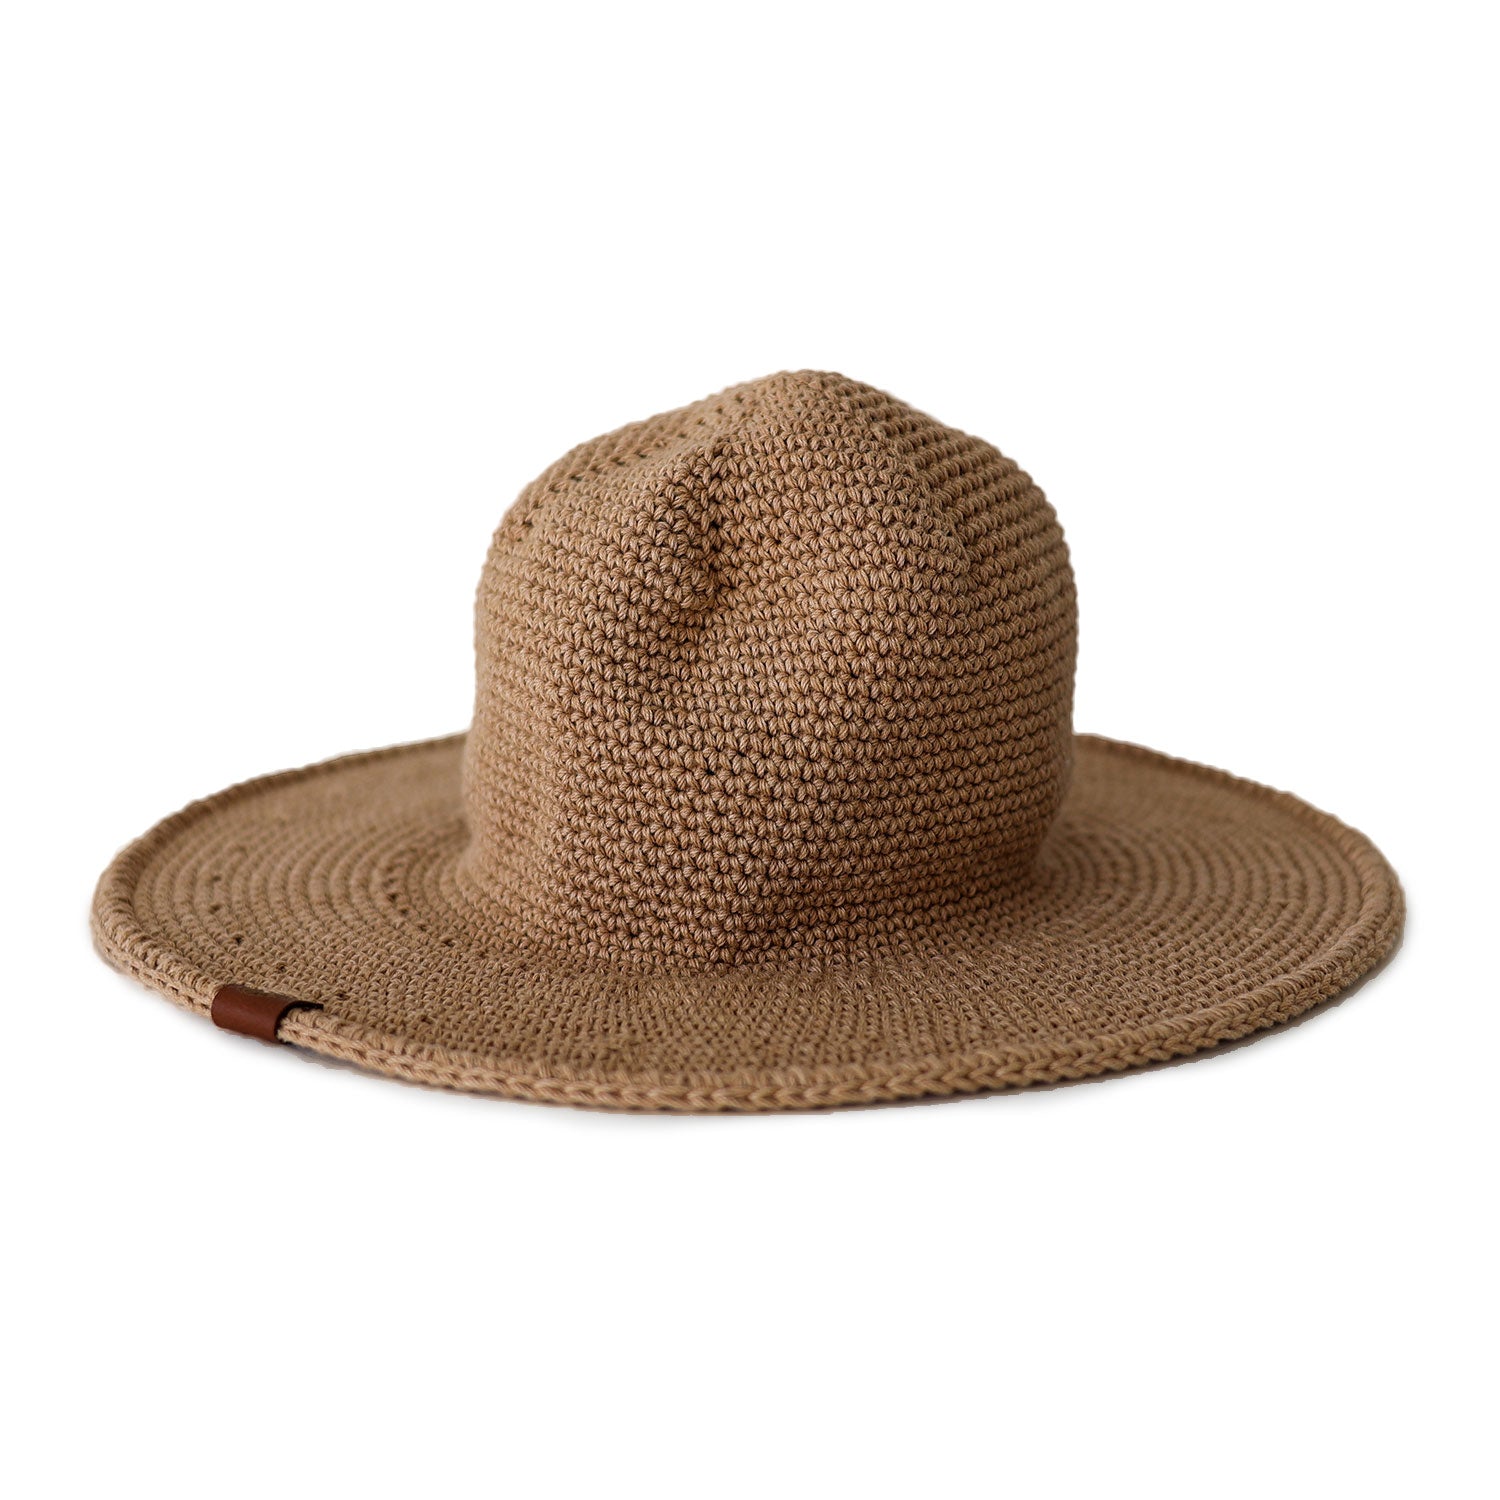 Packable Hat in Sand Color  Dye-free Organic Cotton Hats – North Ferry Hats